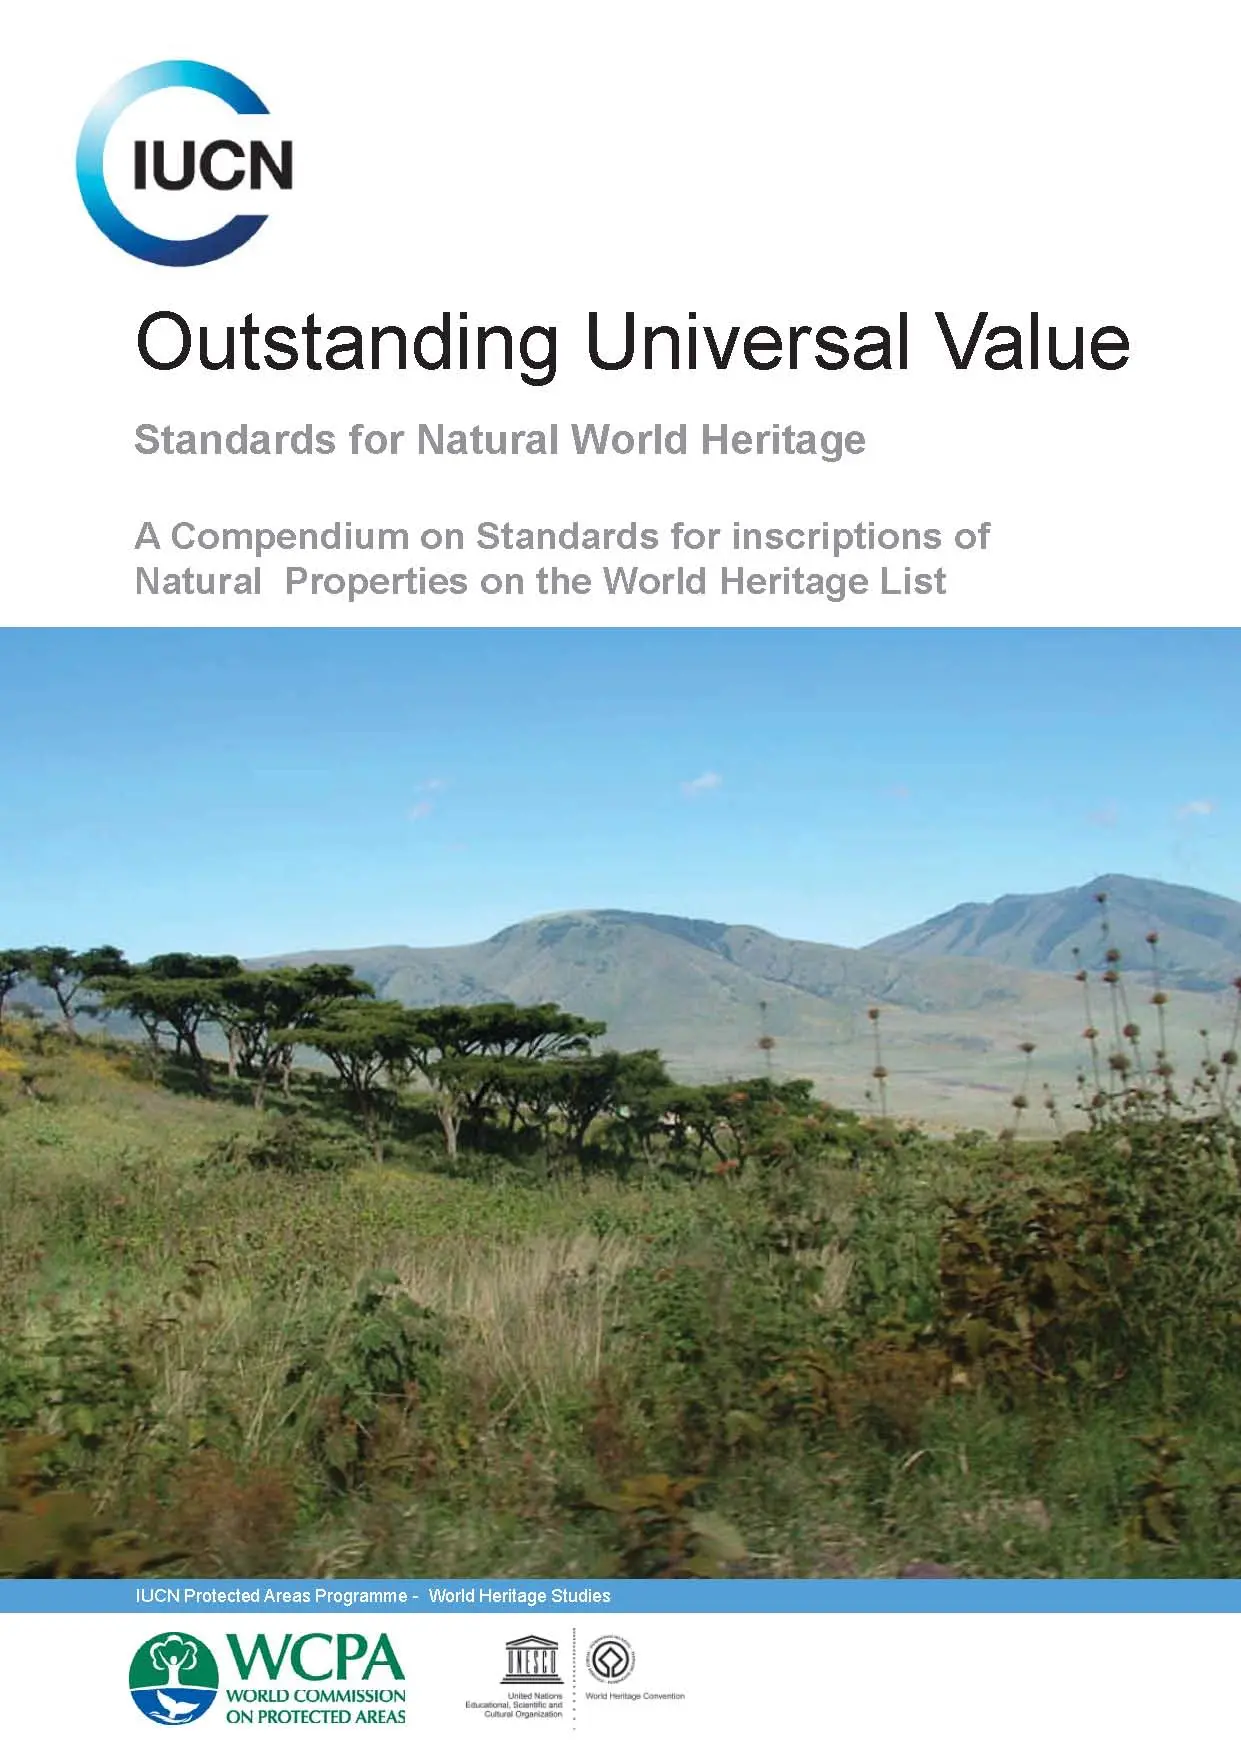 A Compendium on Standards for Inscriptions of Natural
Properties on the World Heritage List